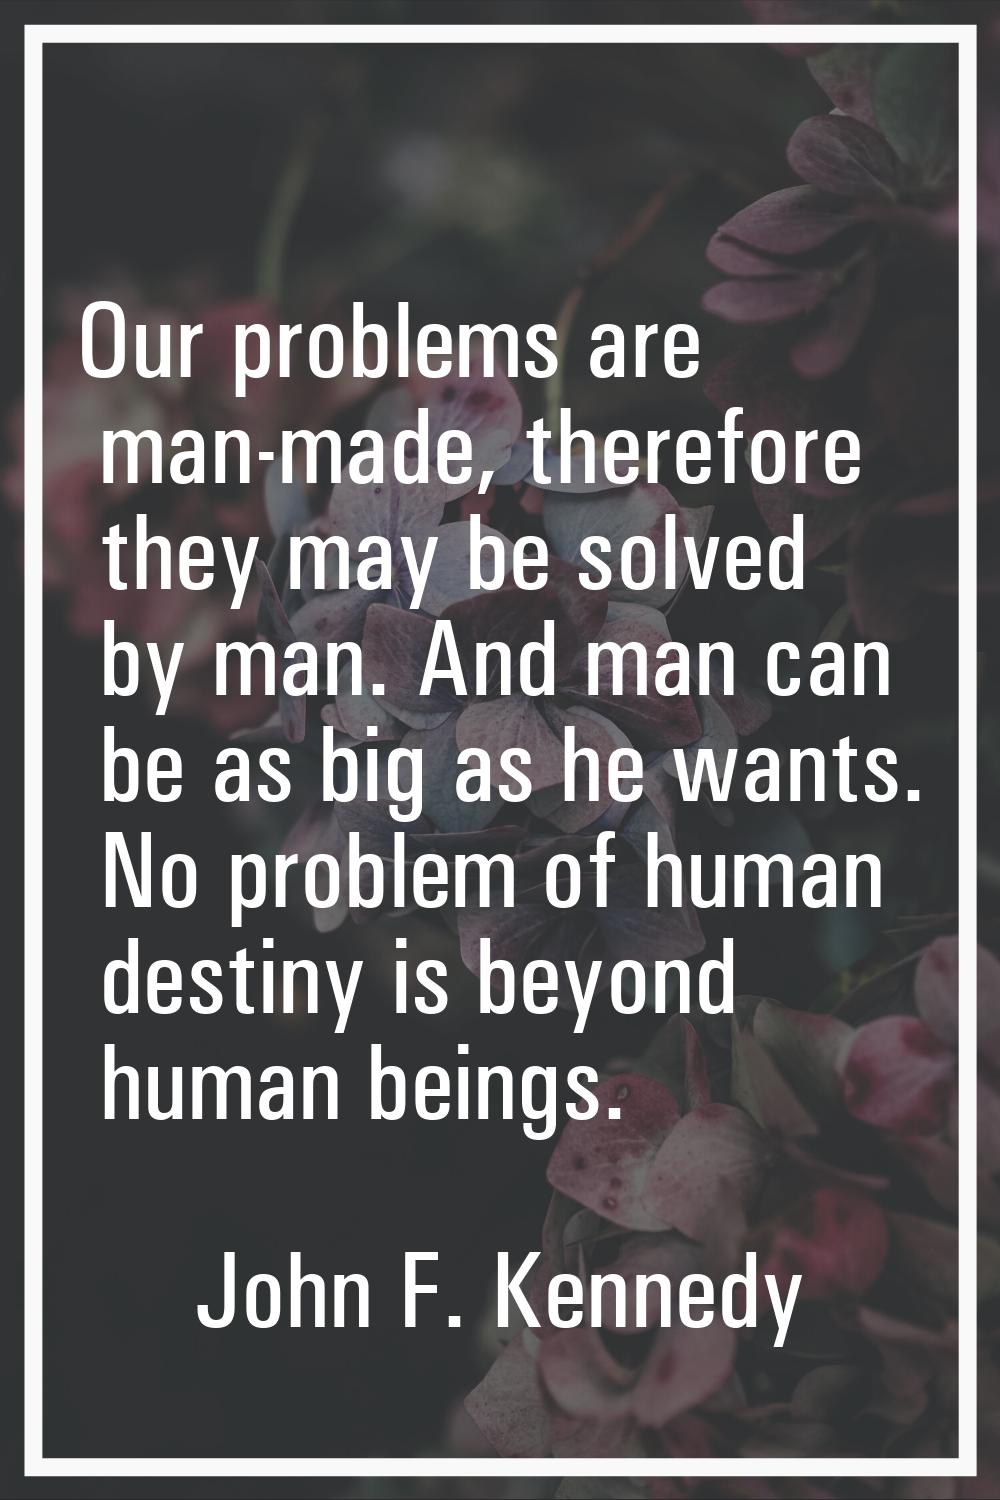 Our problems are man-made, therefore they may be solved by man. And man can be as big as he wants. 